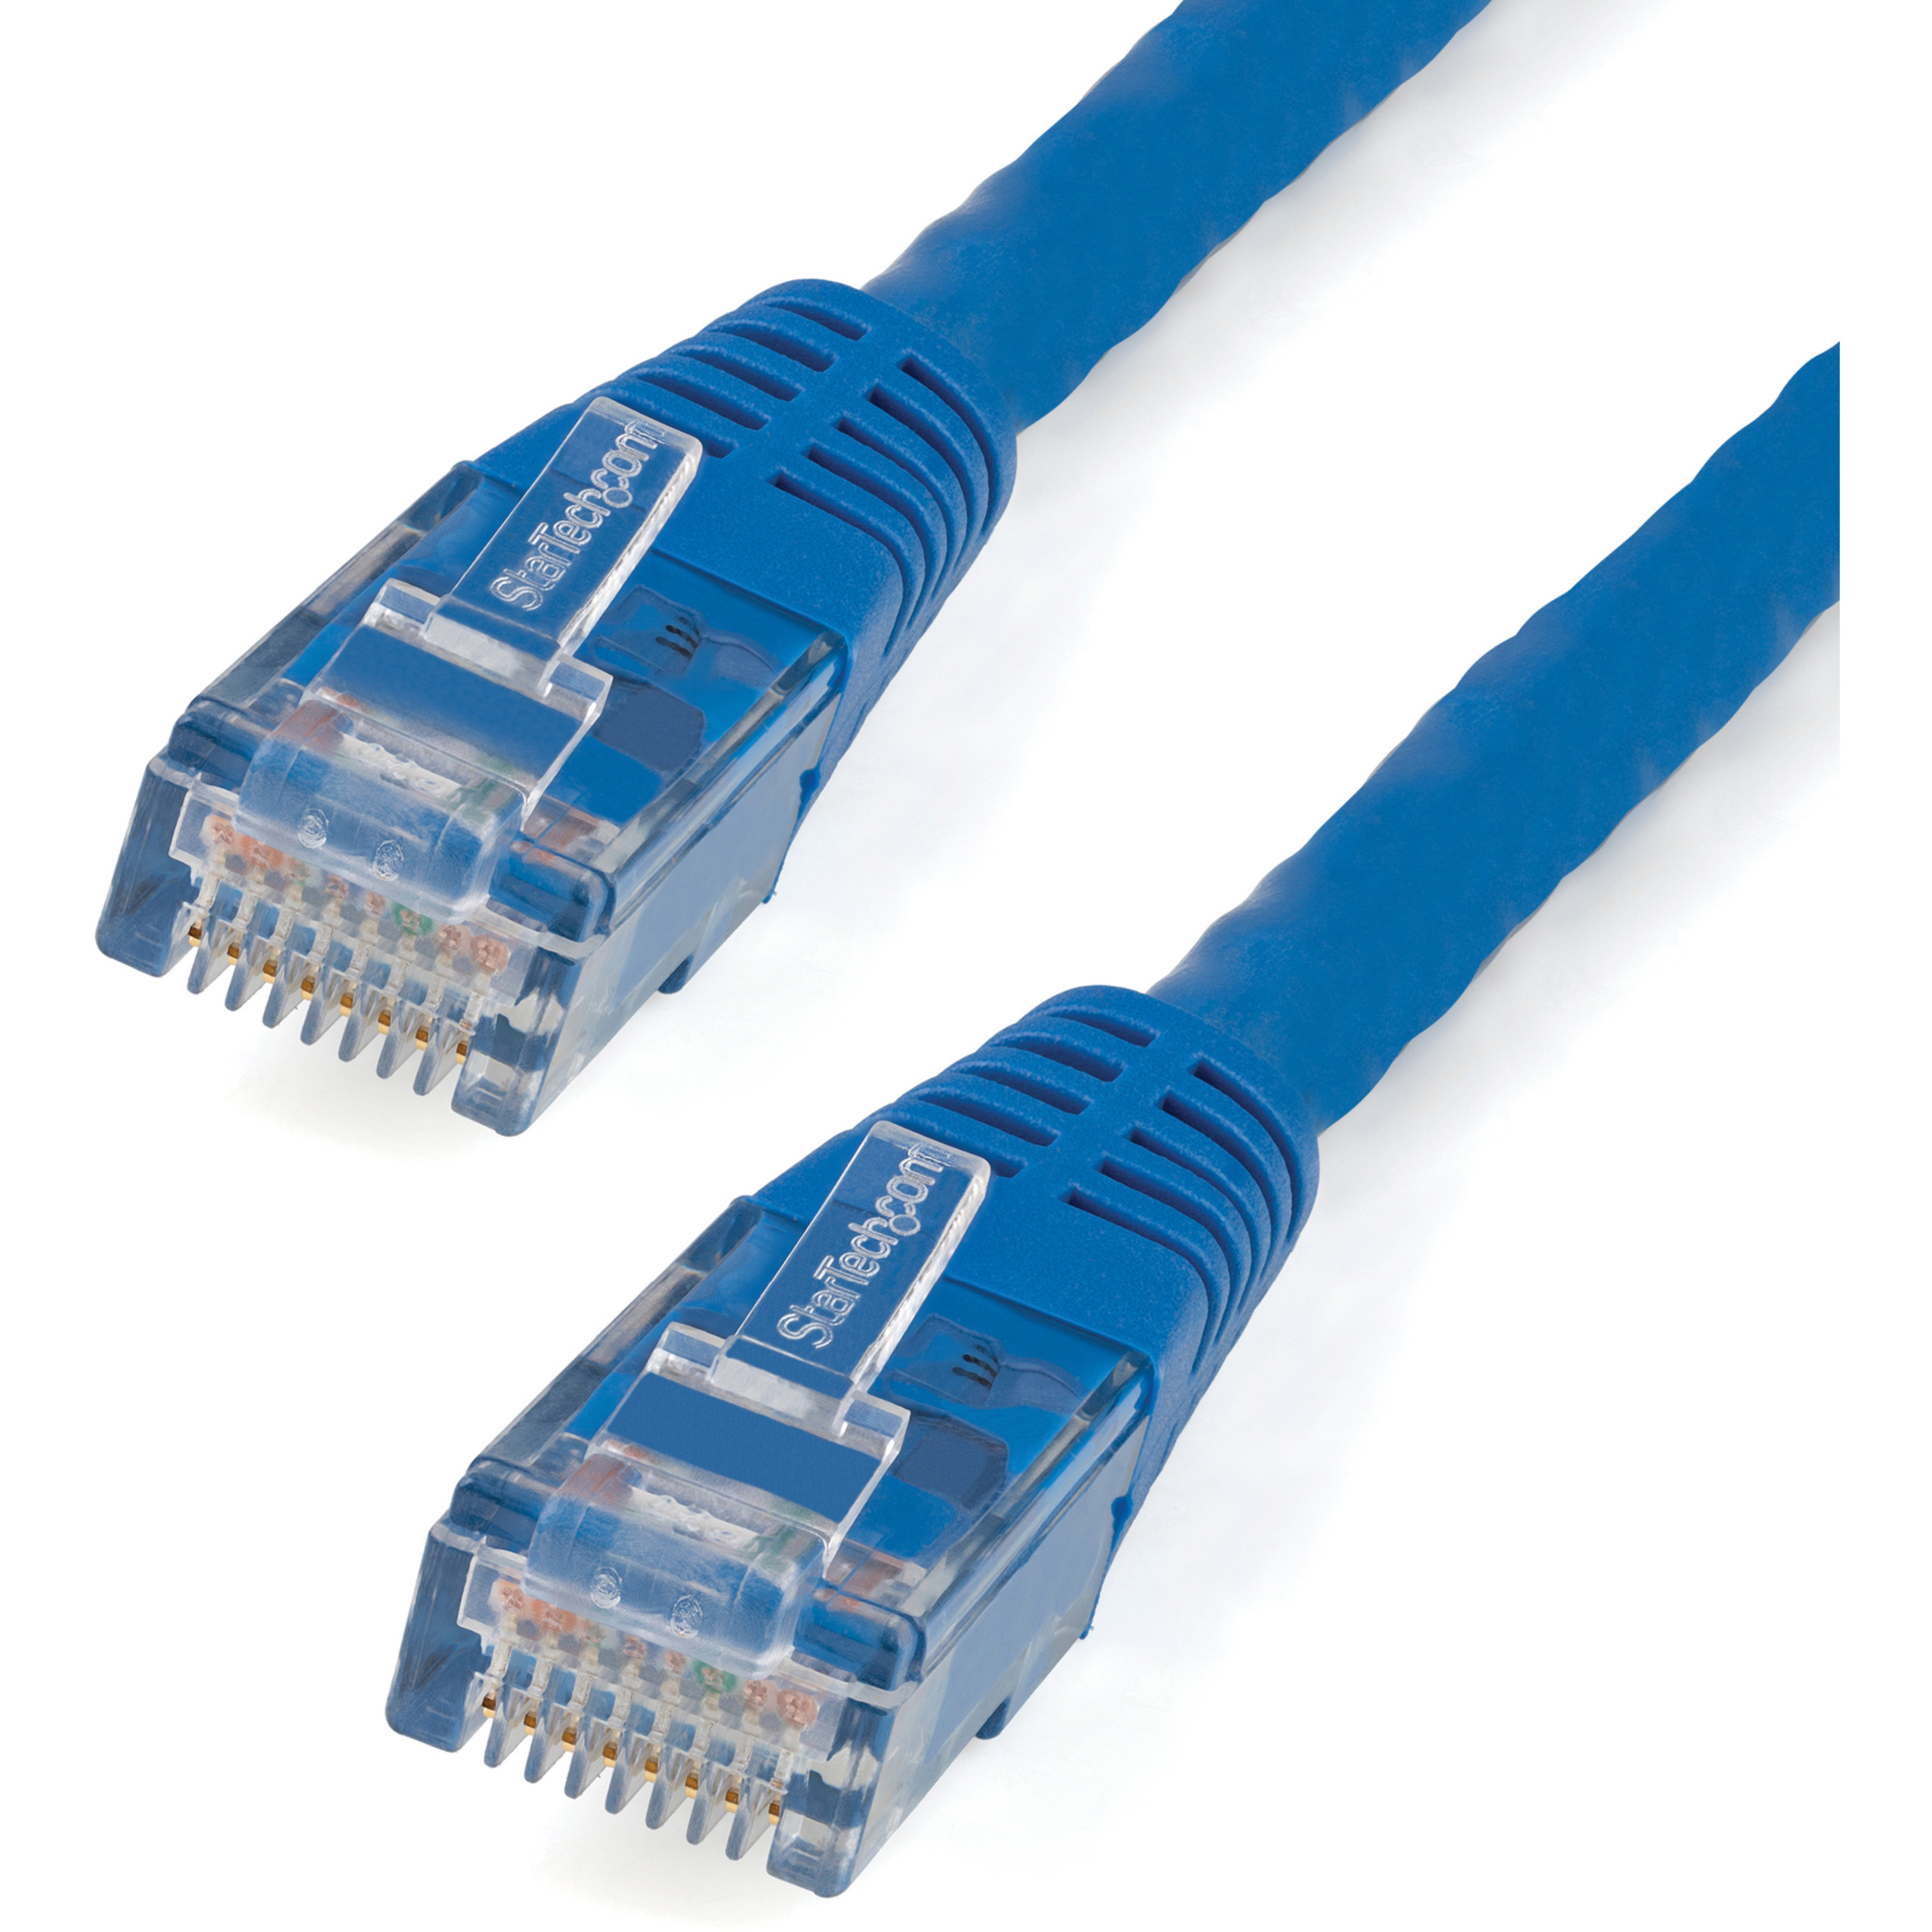 Startech .com 35ft CAT6 Ethernet CableBlue Molded Gigabit100W PoE UTP 650MHzCategory 6 Patch Cord UL Certified Wiring/TIA35ft Blu… C6PATCH35BL